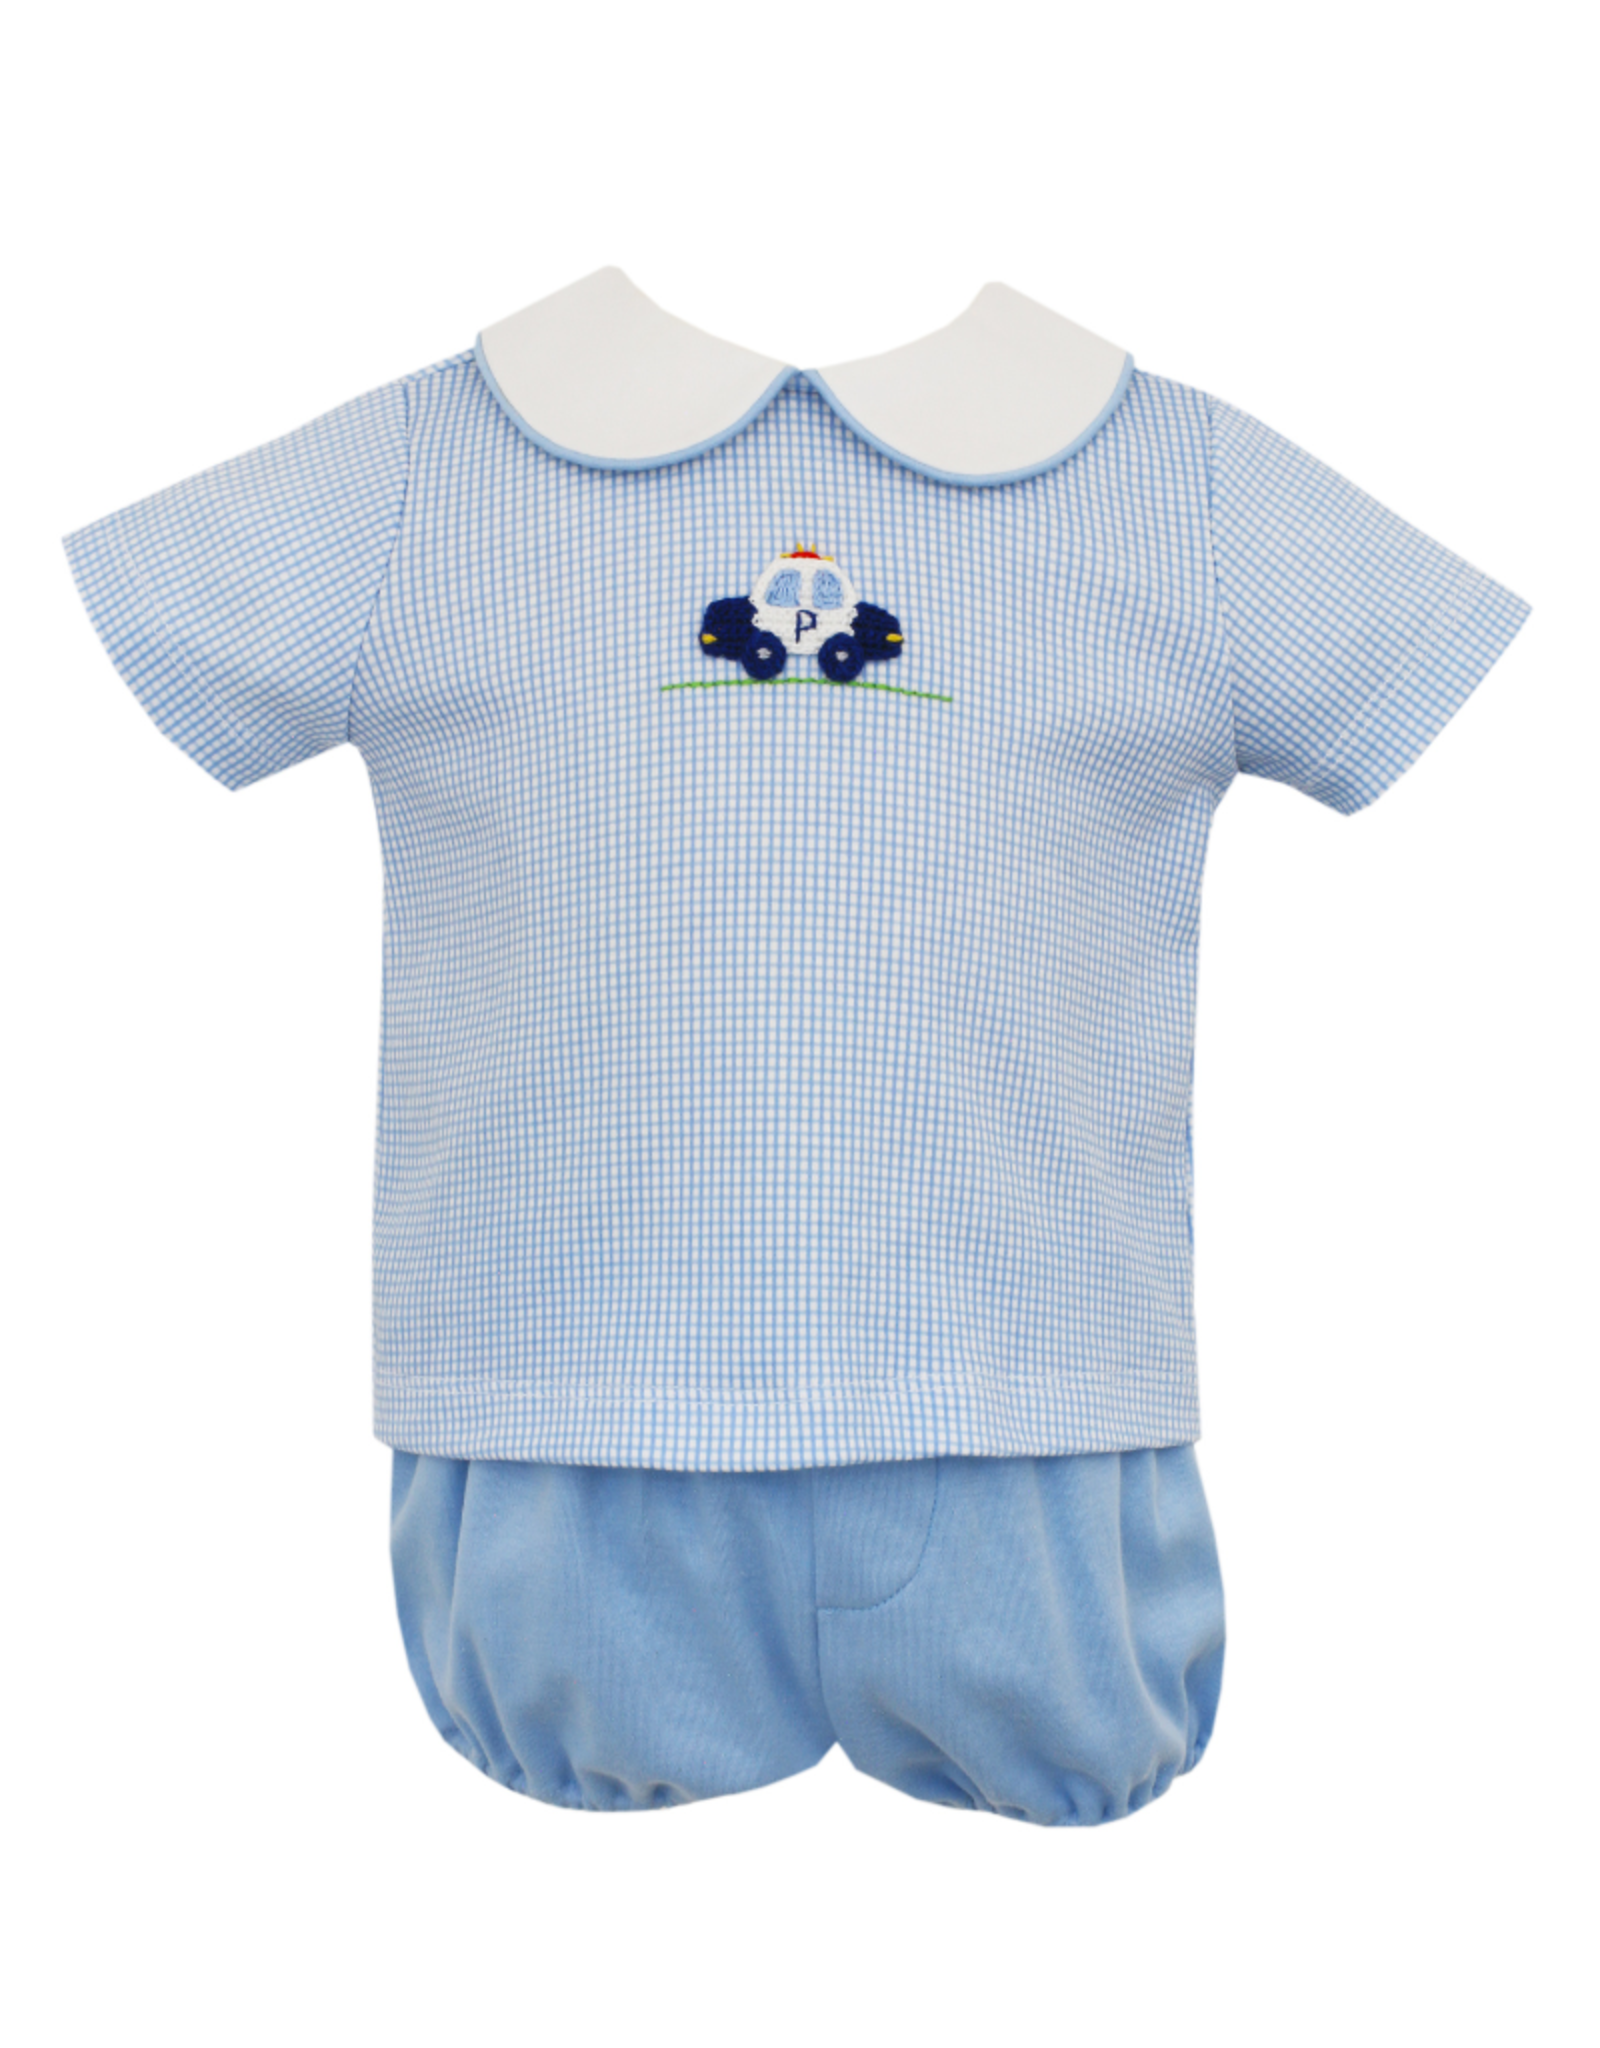 Petit Bebe Blue Gingham Knit Diaper Set with Police Car